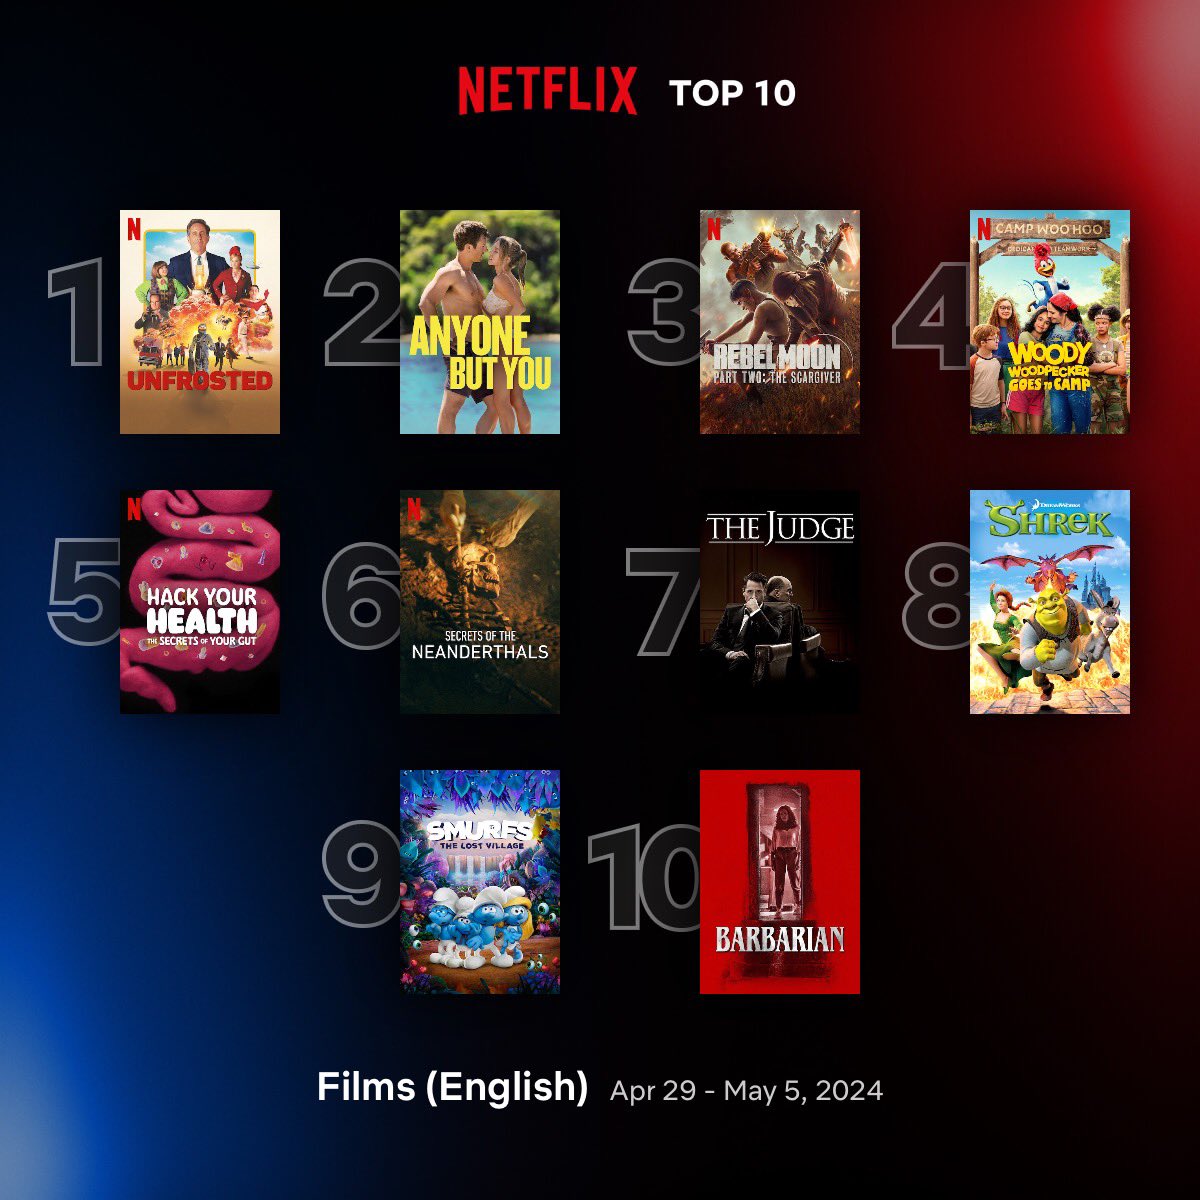 Global Top 10 English Films on Netflix between 29 April - 5 May

1. #Unfrosted
2. #AnyoneButYou
3. #RebelMoonPartTwo: The Scargiver
4. #WoodyWoodpeckerGoesToCamp
5. #HackYourHealth: The Secrets of Your Gut
6. #SecretsOfTheNeanderthals
7. #TheJudge
8. #Shrek
9. #Smurfs: The Lost…